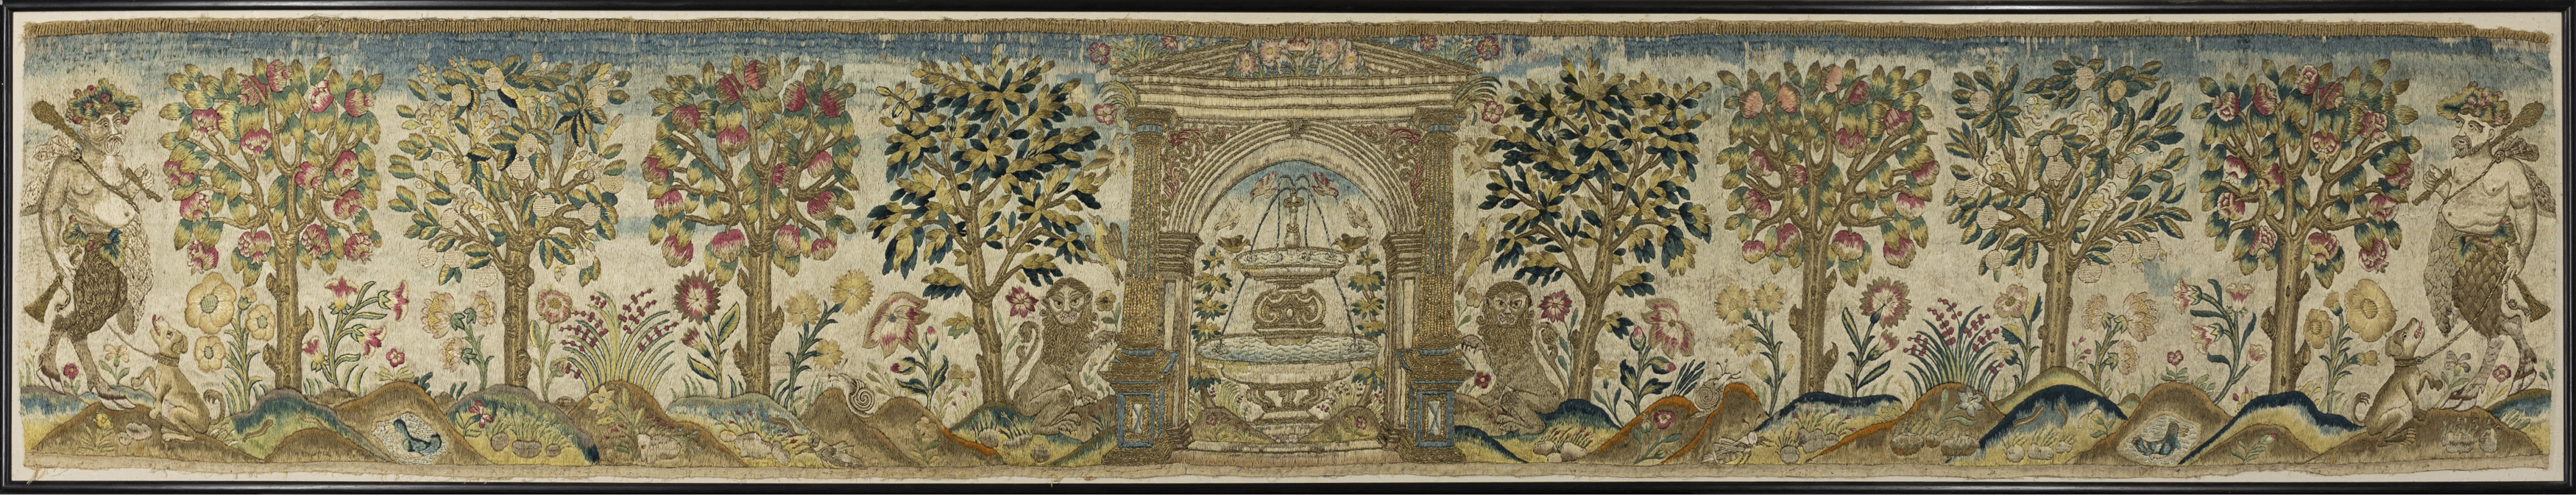 A fine silk and metal thread needlework panel, Possibly Italian, 17th century, With a central fou... - Image 2 of 2